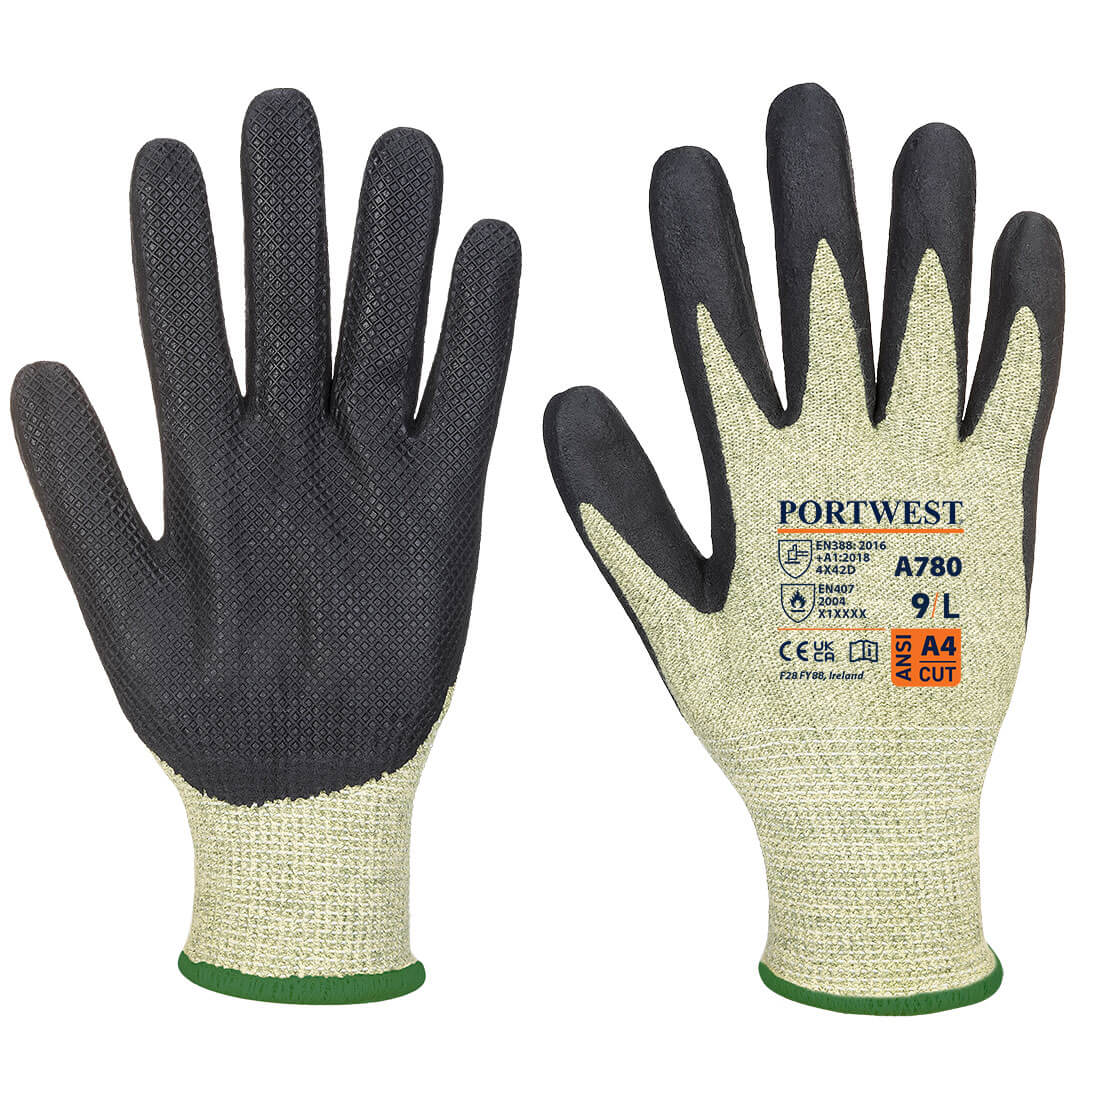 HAND PROTECTION, Specialist Gloves